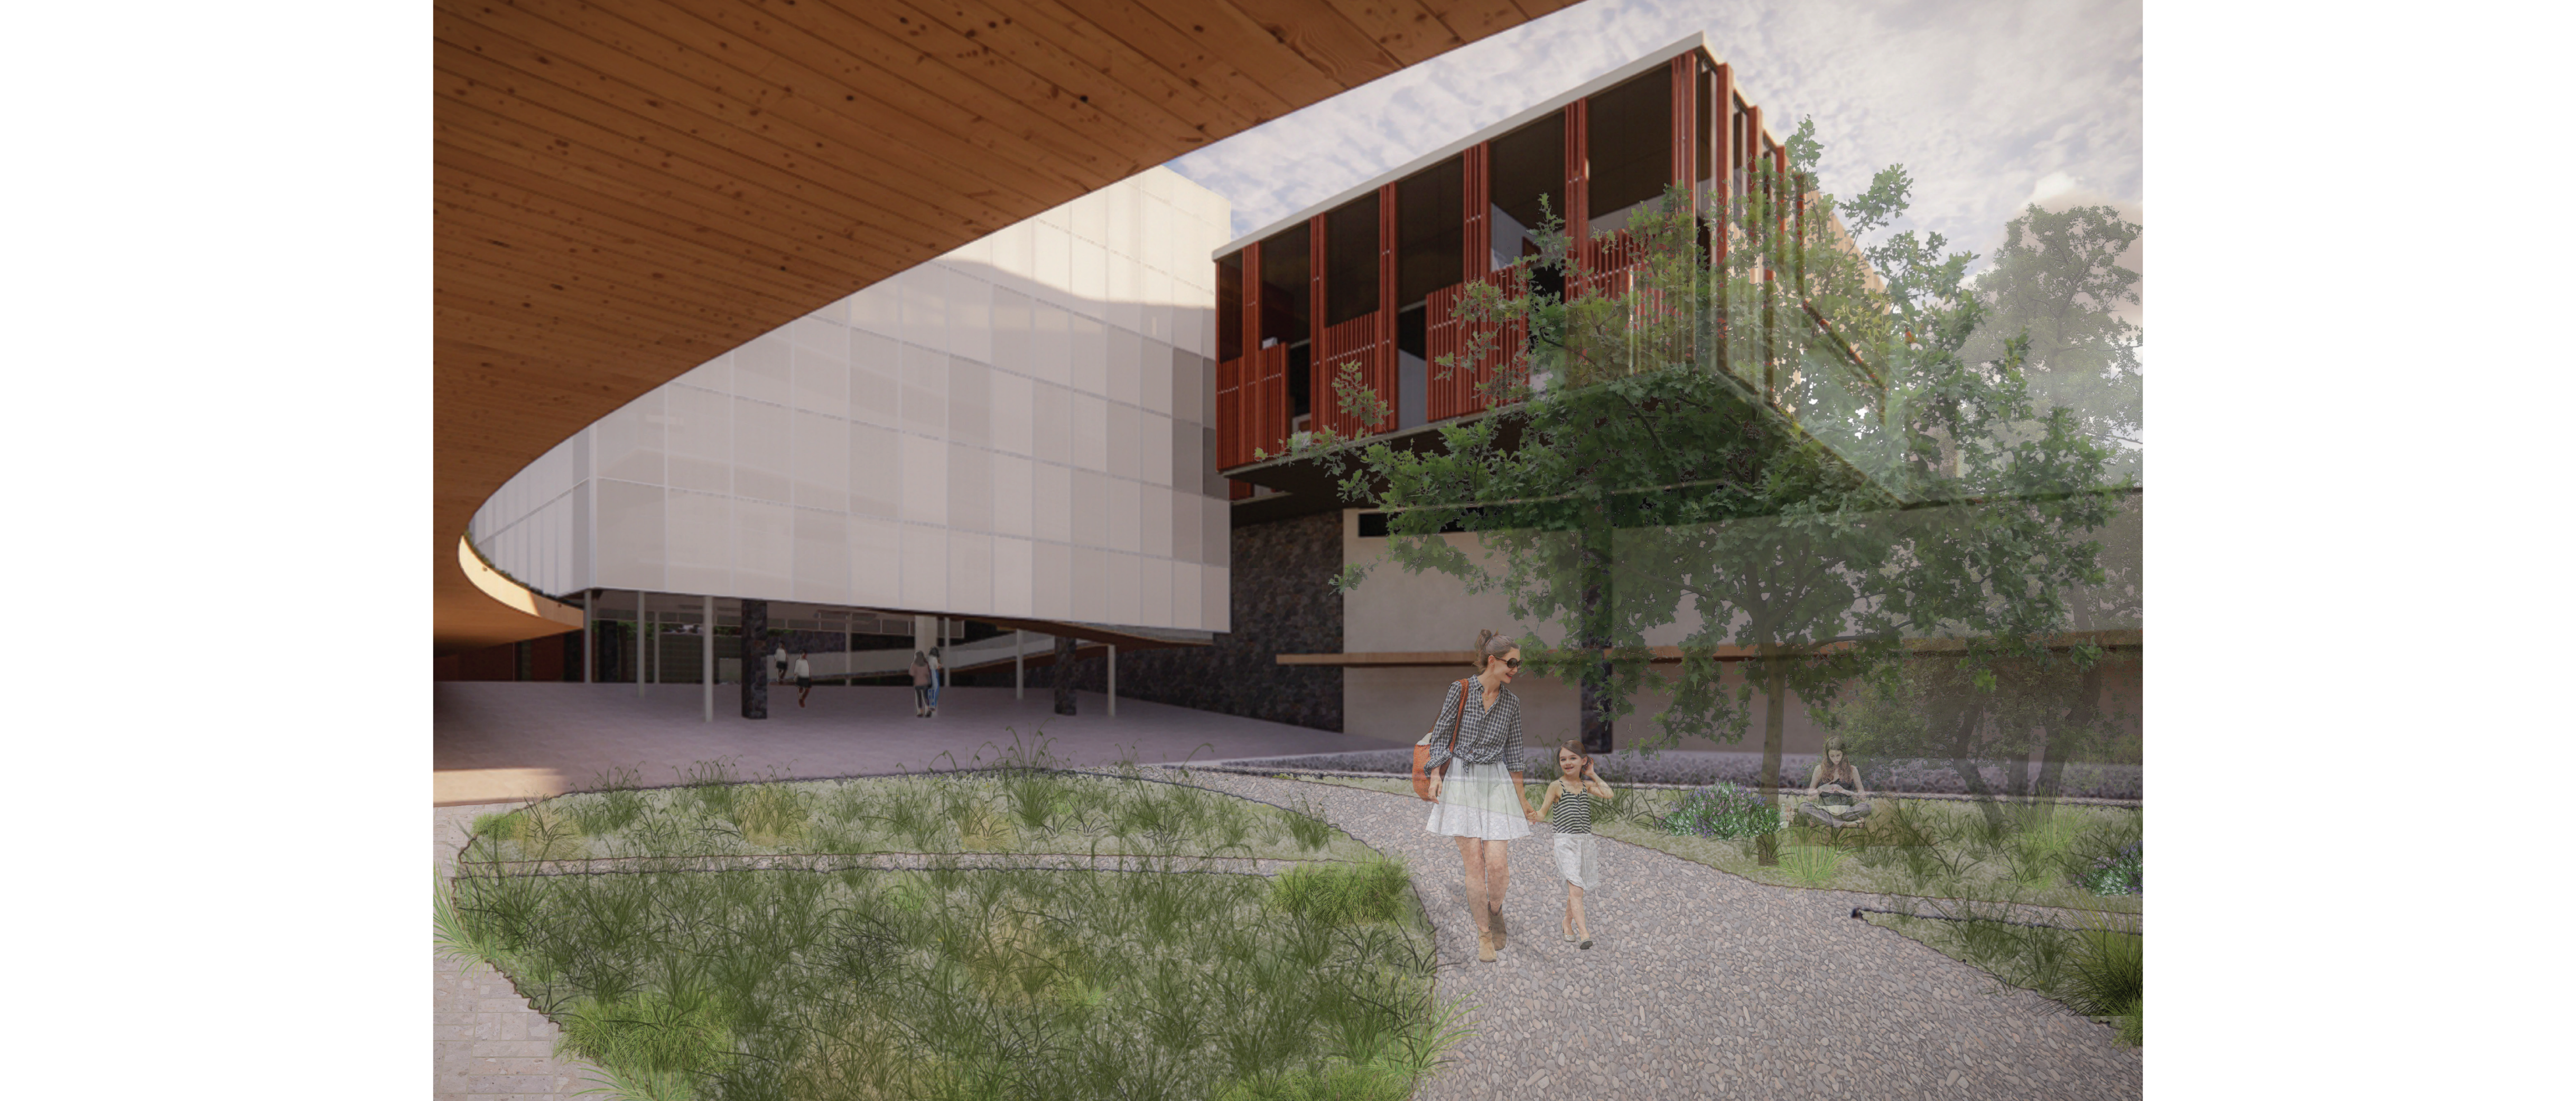 The REVEAL | Elly Hall | ARCH 8960 | Professor Deaton